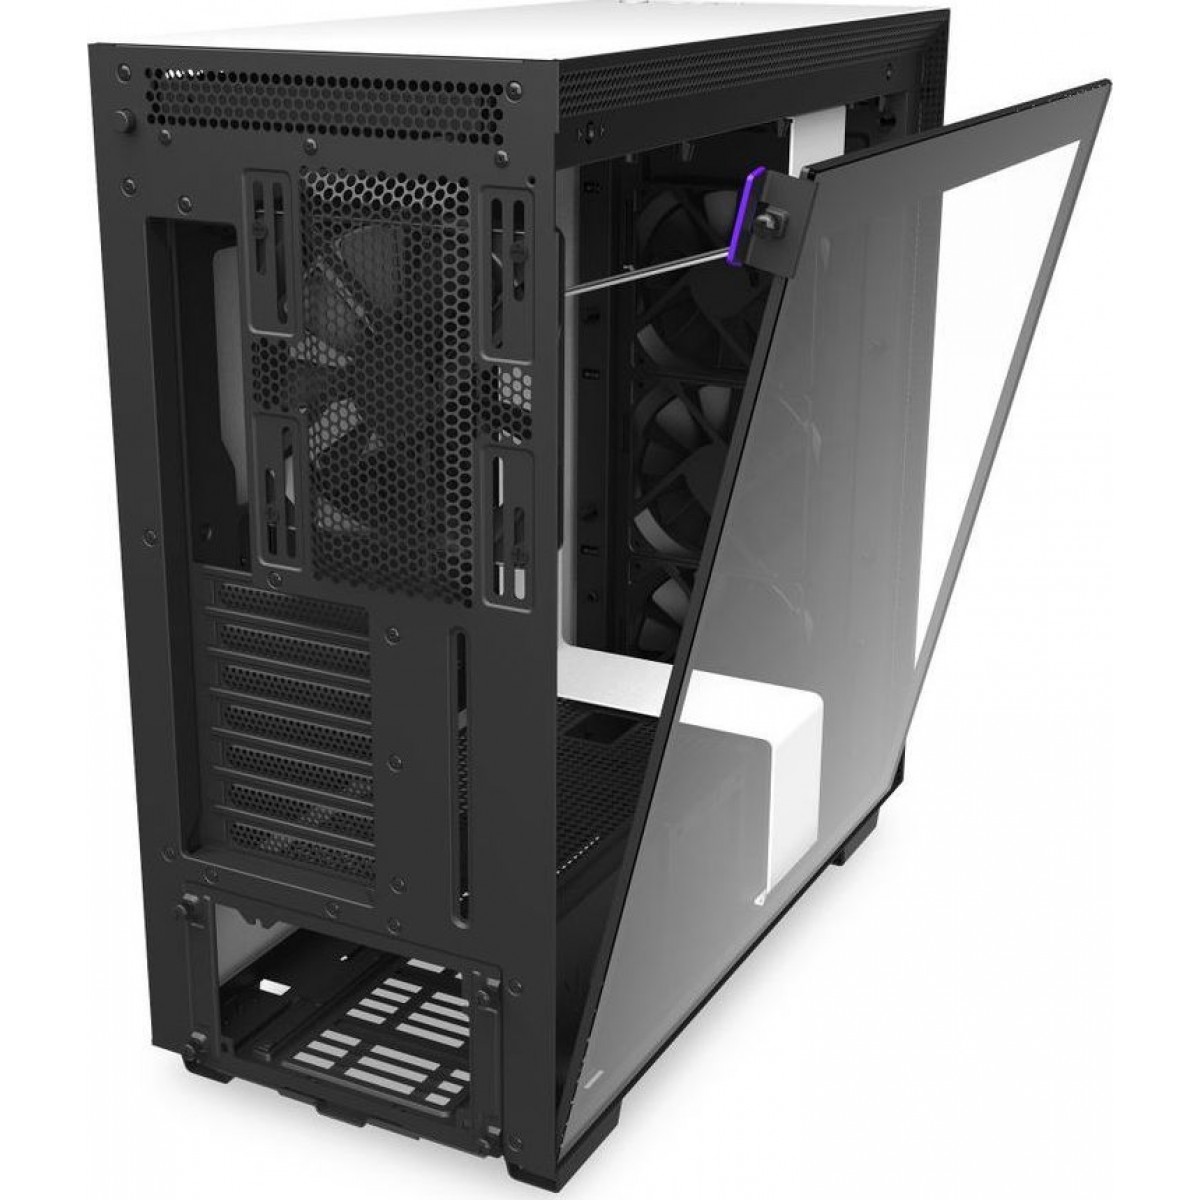 CASE NZXT H710 TOWER TEMPERED GLASS 272MM EATX WHITE CA-H710B-W1